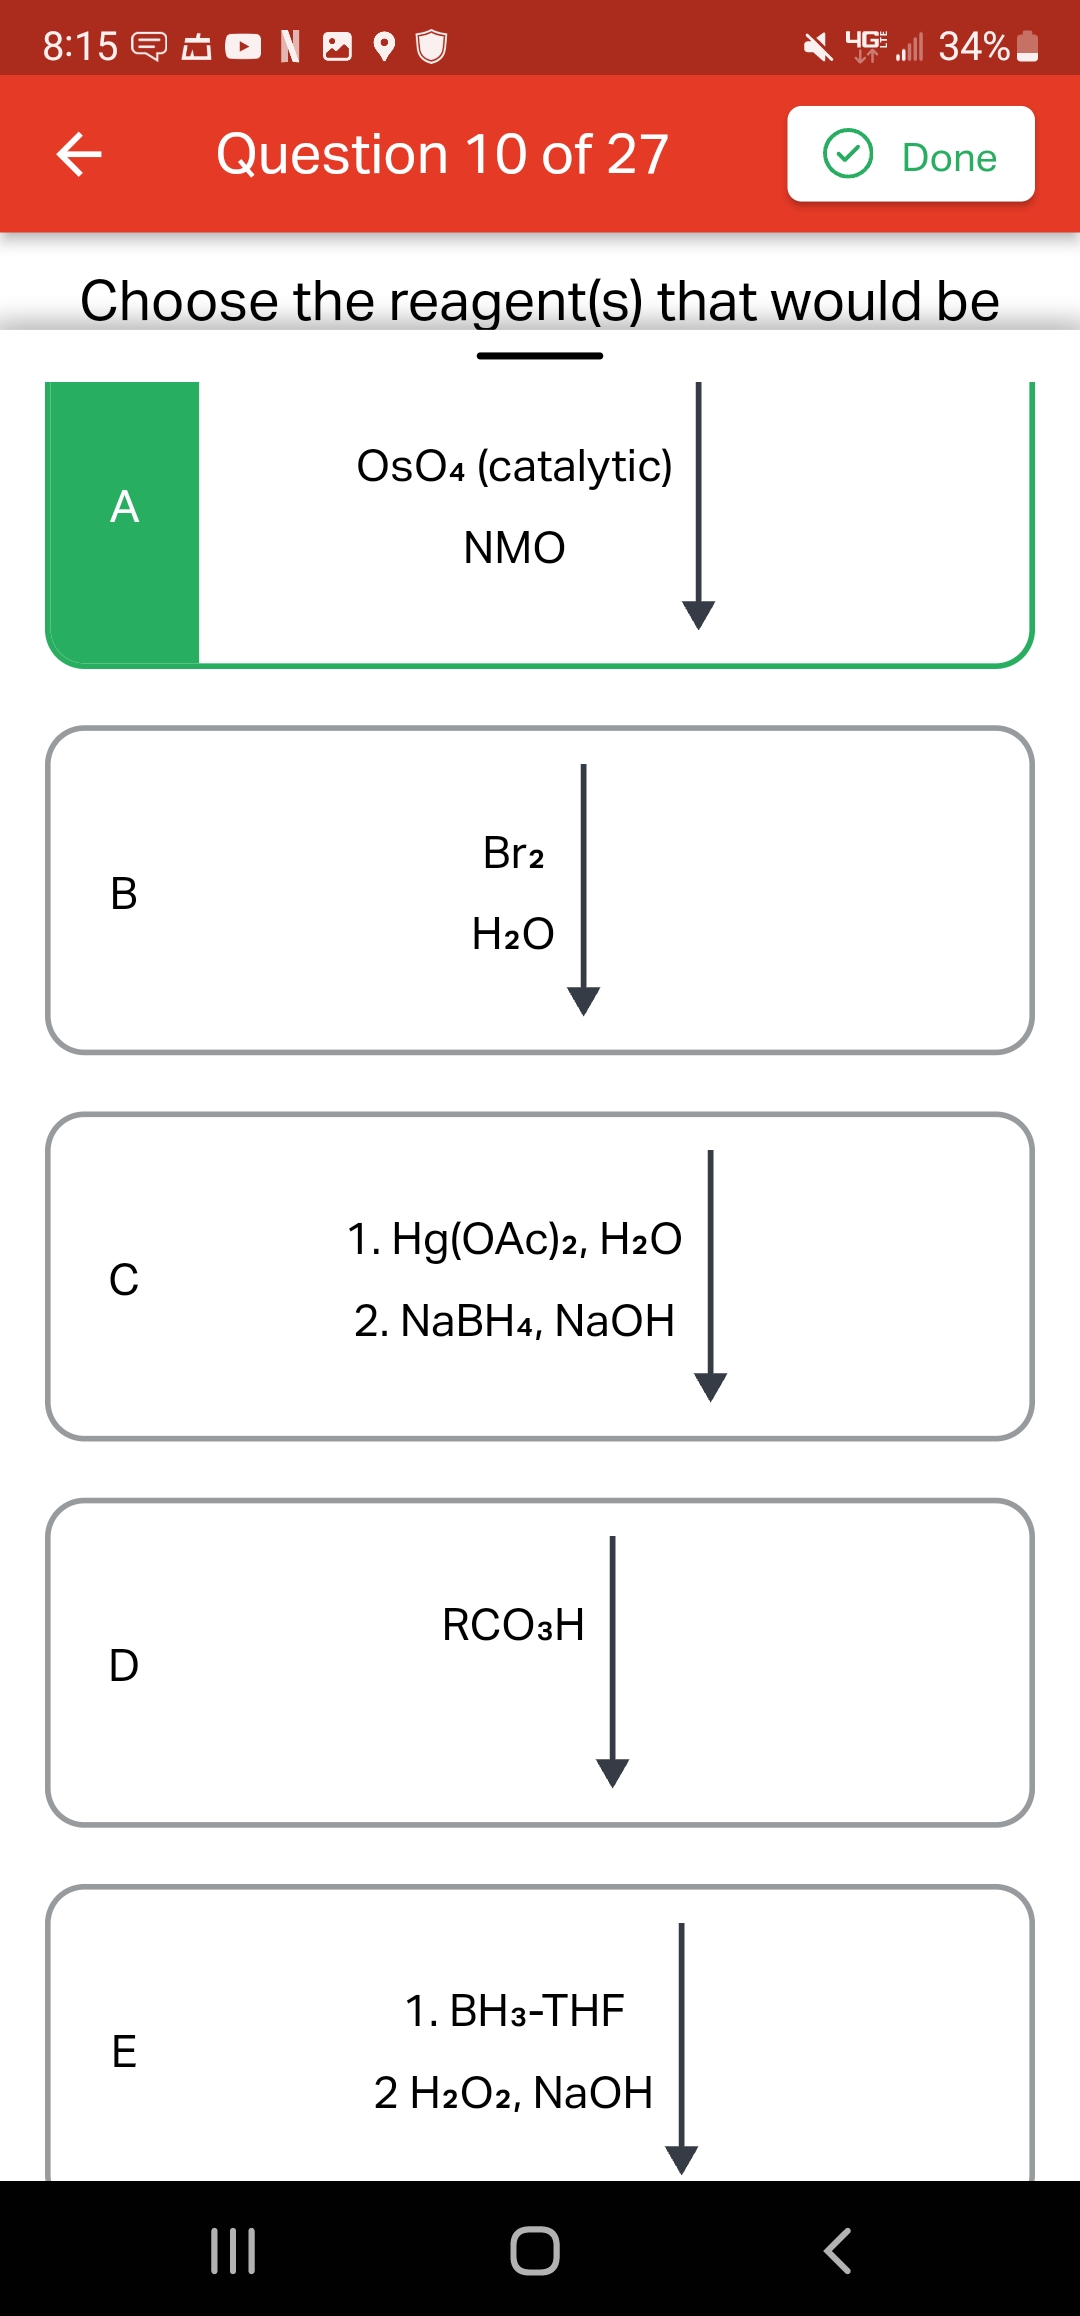 8:15 NO
←
A
B
Choose the reagent(s) that would be
C
D
Question 10 of 27
E
OsO4 (catalytic)
NMO
Br2
H₂O
1. Hg(OAc)2, H₂O
2. NaBH4, NaOH
RCO3H
1. BH3-THF
2 H2O2, NaOH
HGE || 34%
م
Done